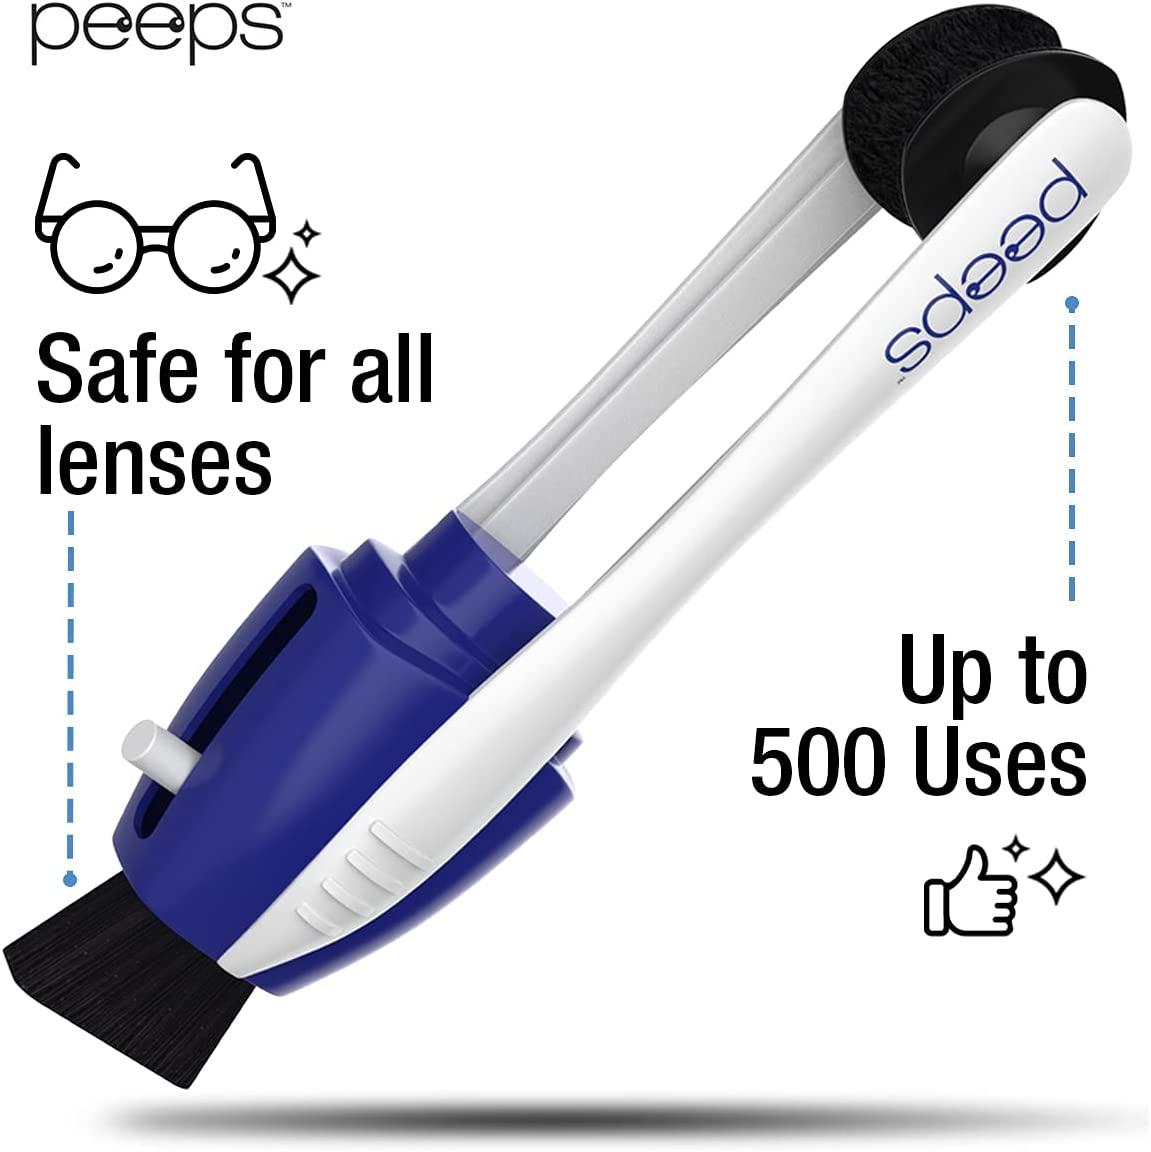 Peeps CarbonKlean Glasses Cleaner - for Eyeglasses, Reading Glasses, and  More - Lens Cleaner With Carbon Microfiber Tech - Injected Black - 1 Count  : Health & Household 